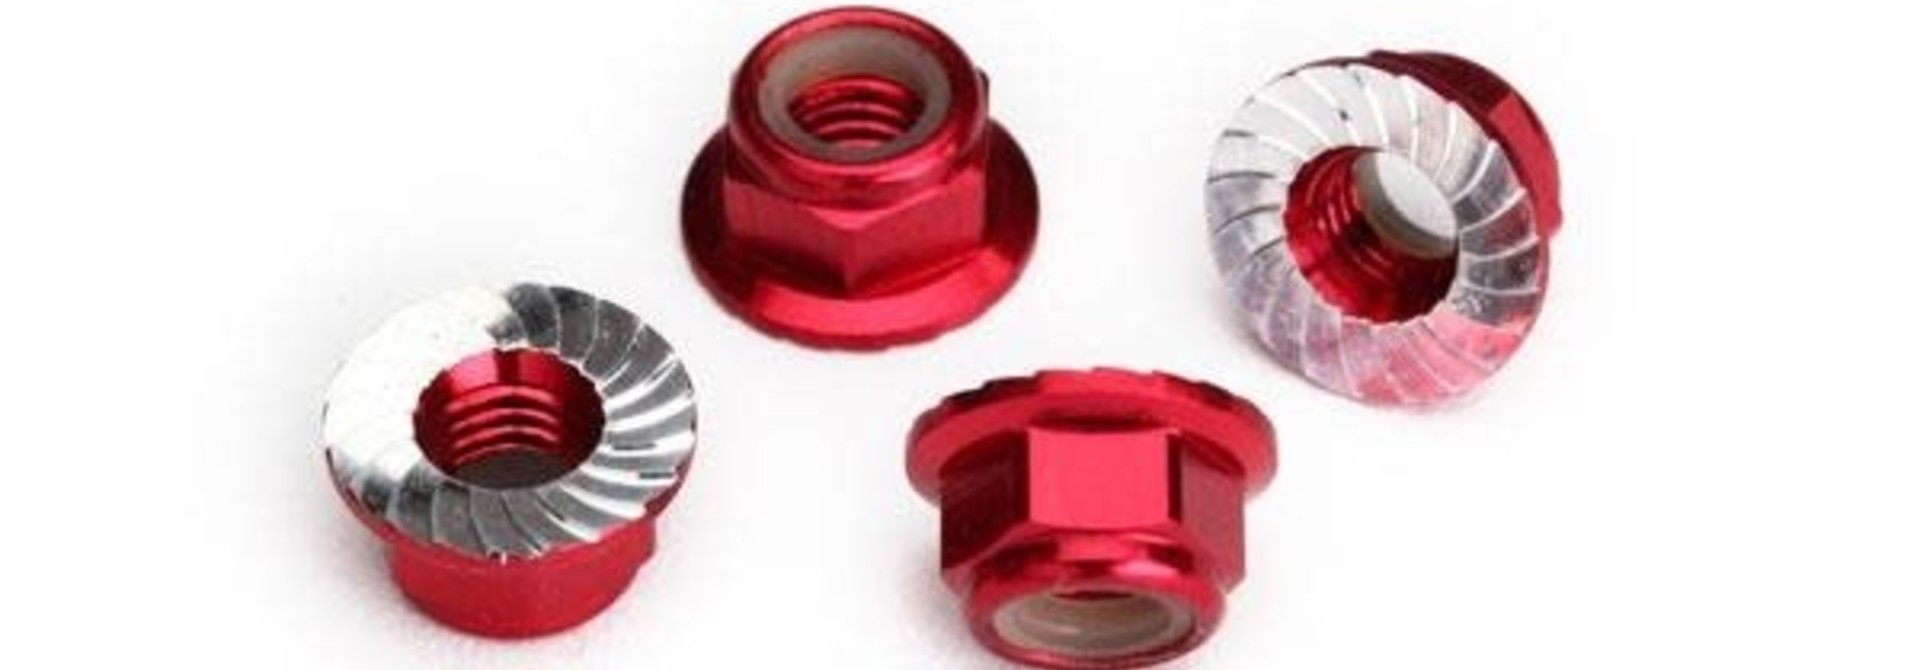 Nuts, 5mm flanged nylon locking (aluminum, red-anodized, serrated) (4)